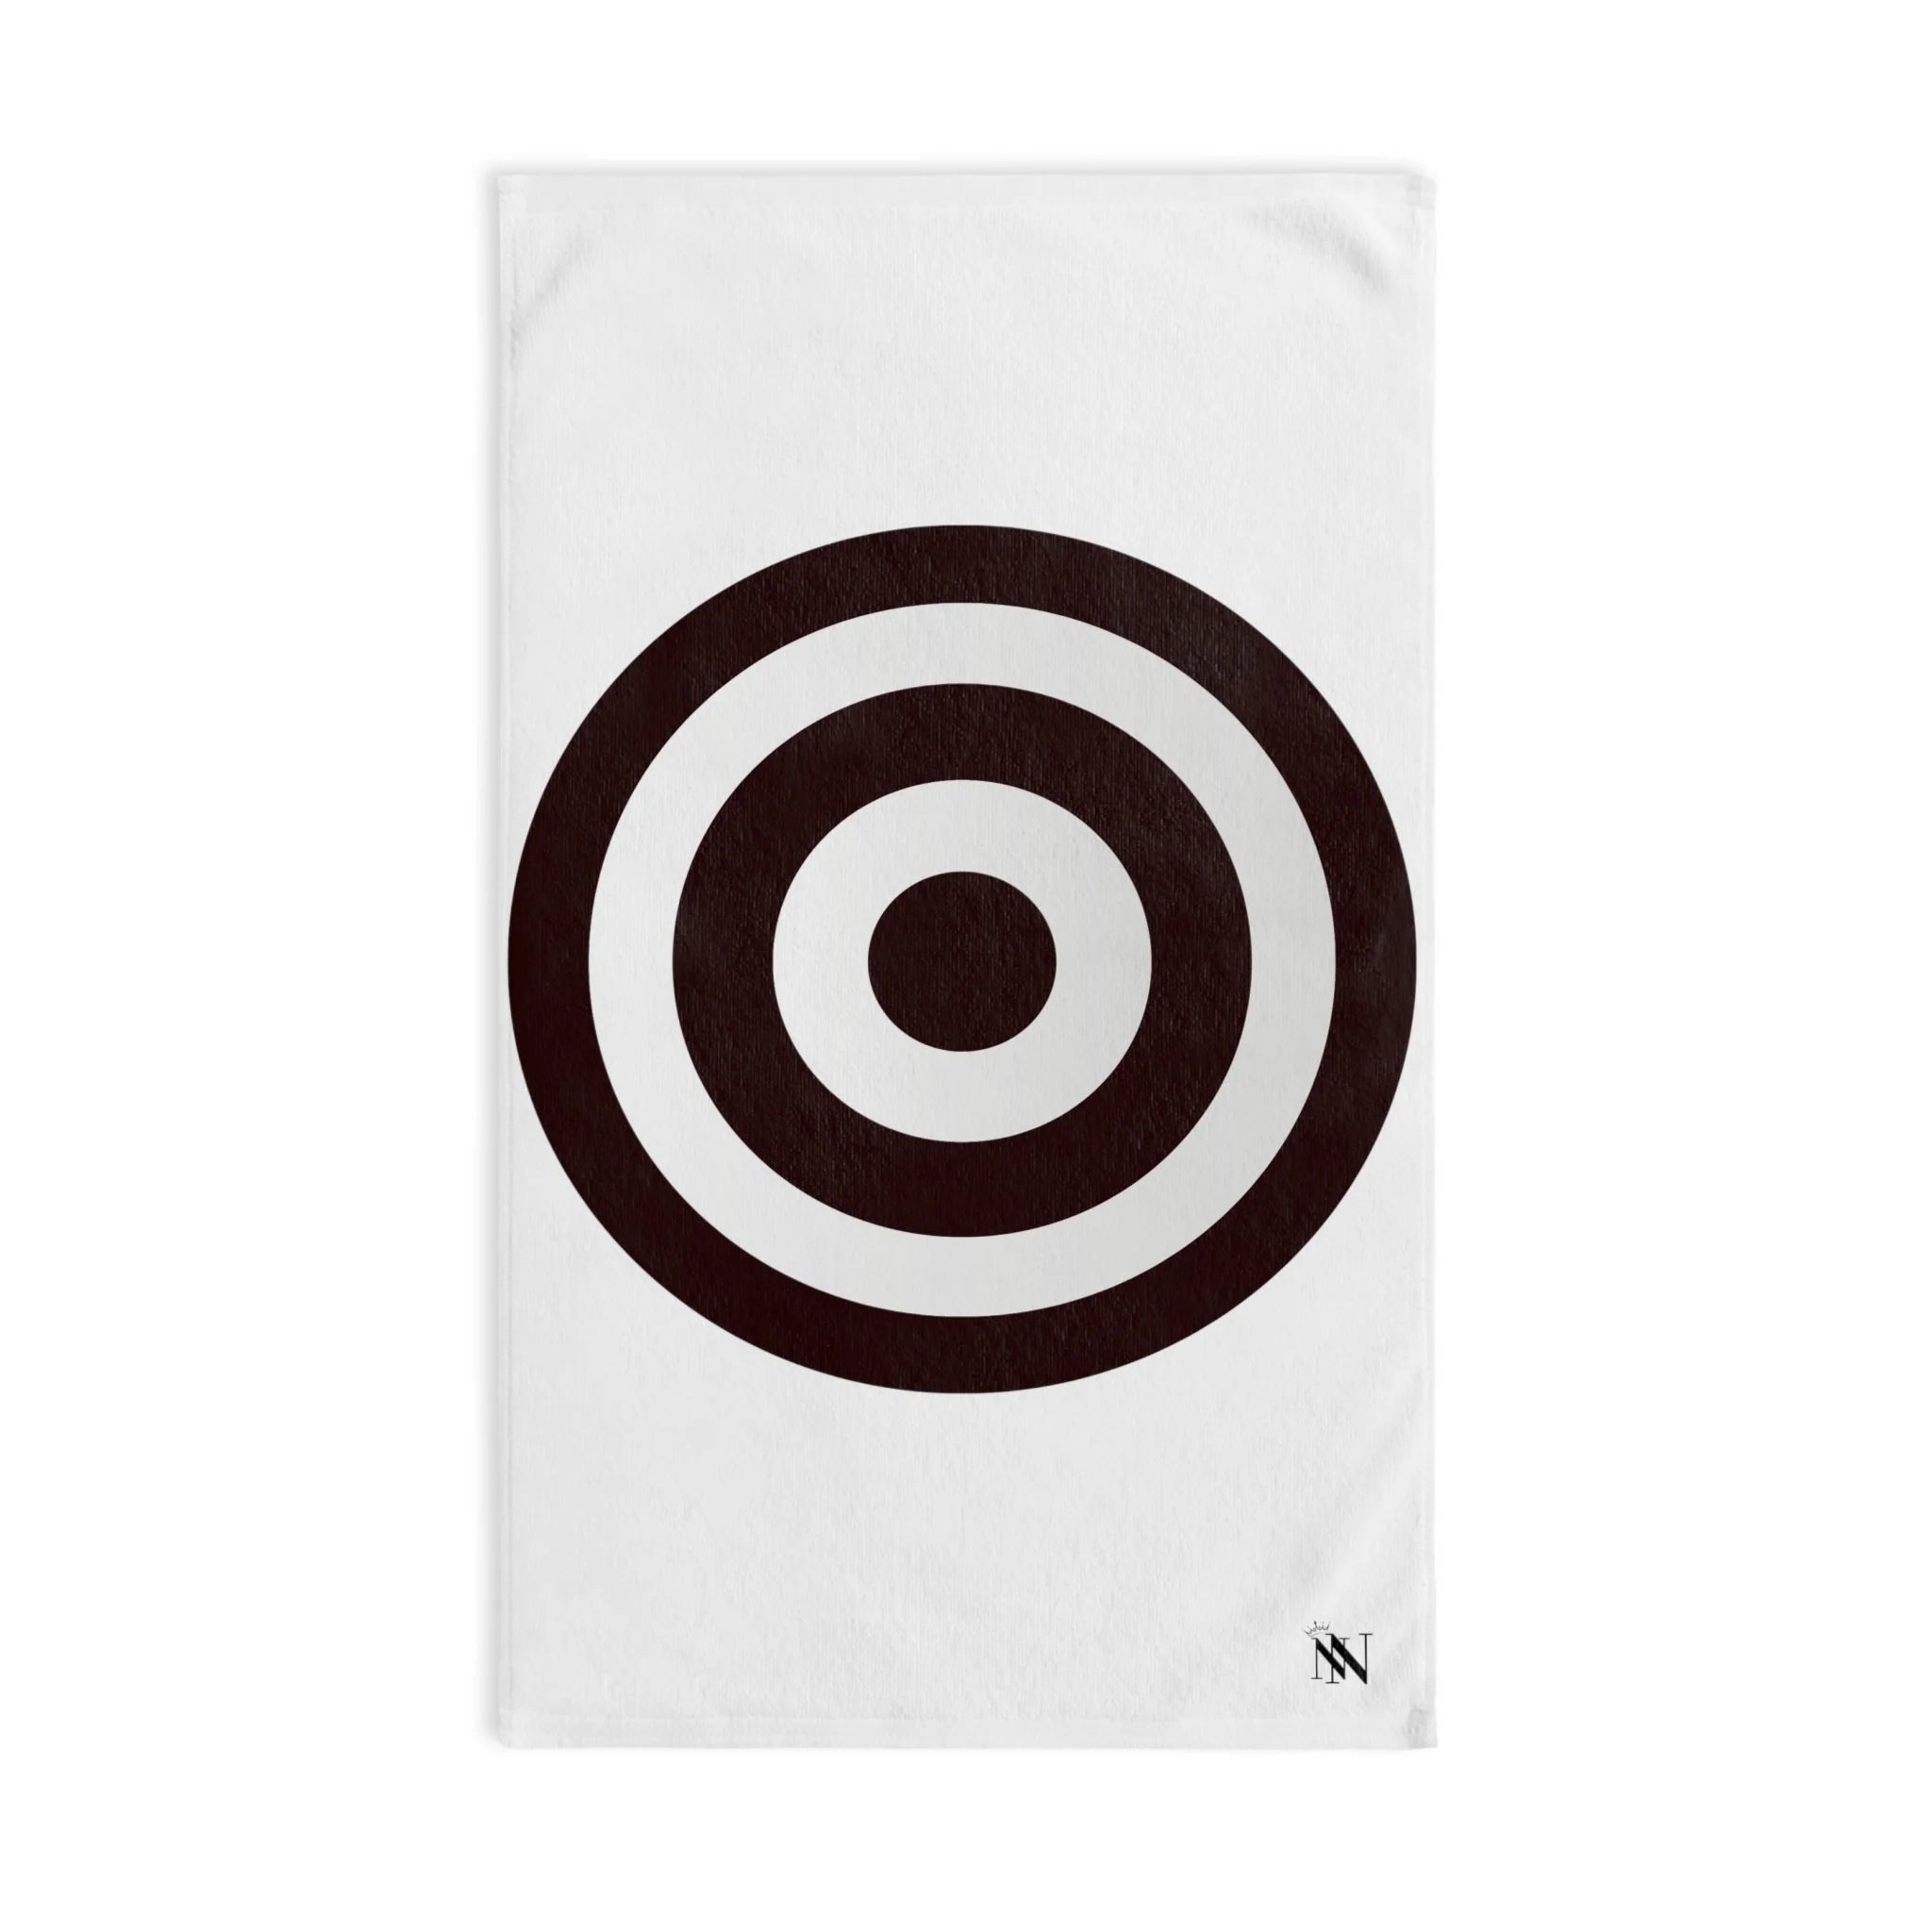 Target Practice | Nectar Napkins Fun-Flirty Lovers' After Sex Towels NECTAR NAPKINS